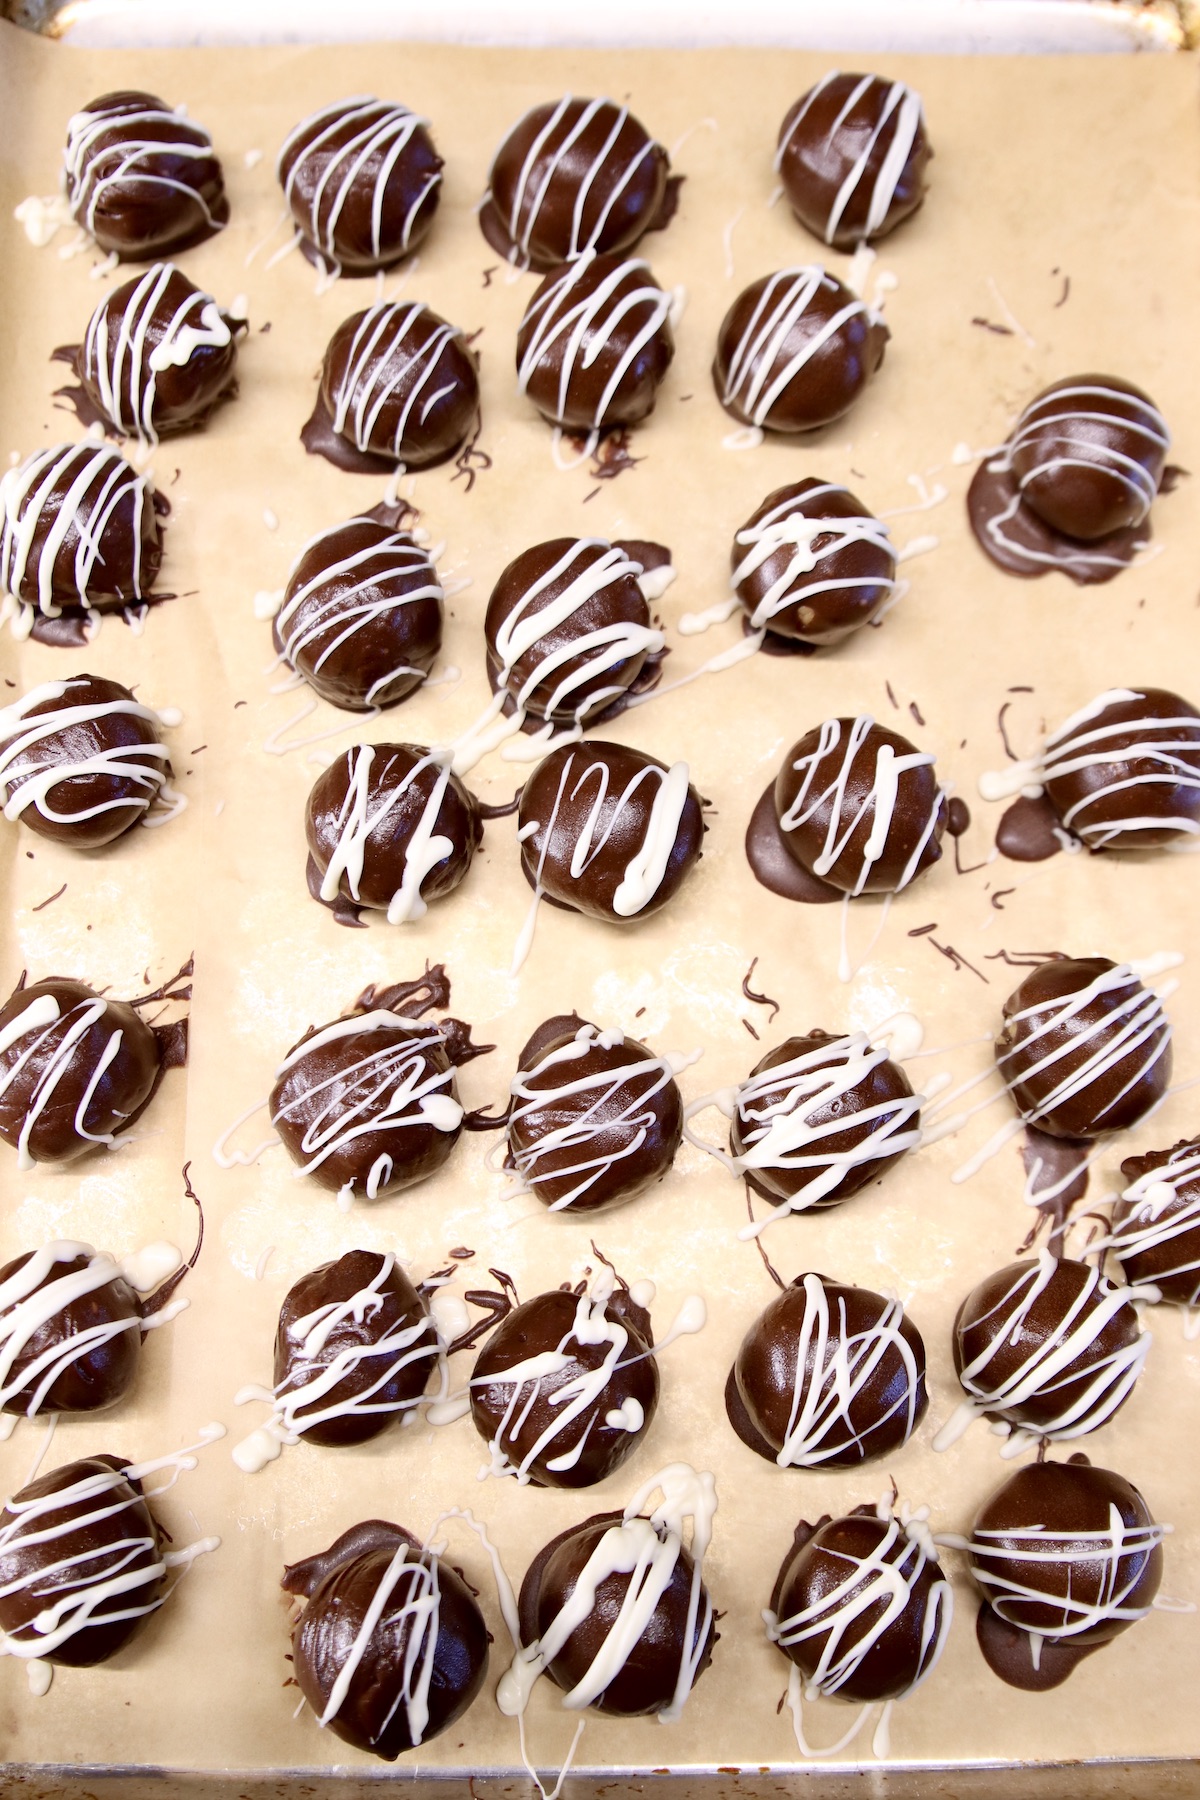 white chocolate drizzle over chocolate peanut butter balls